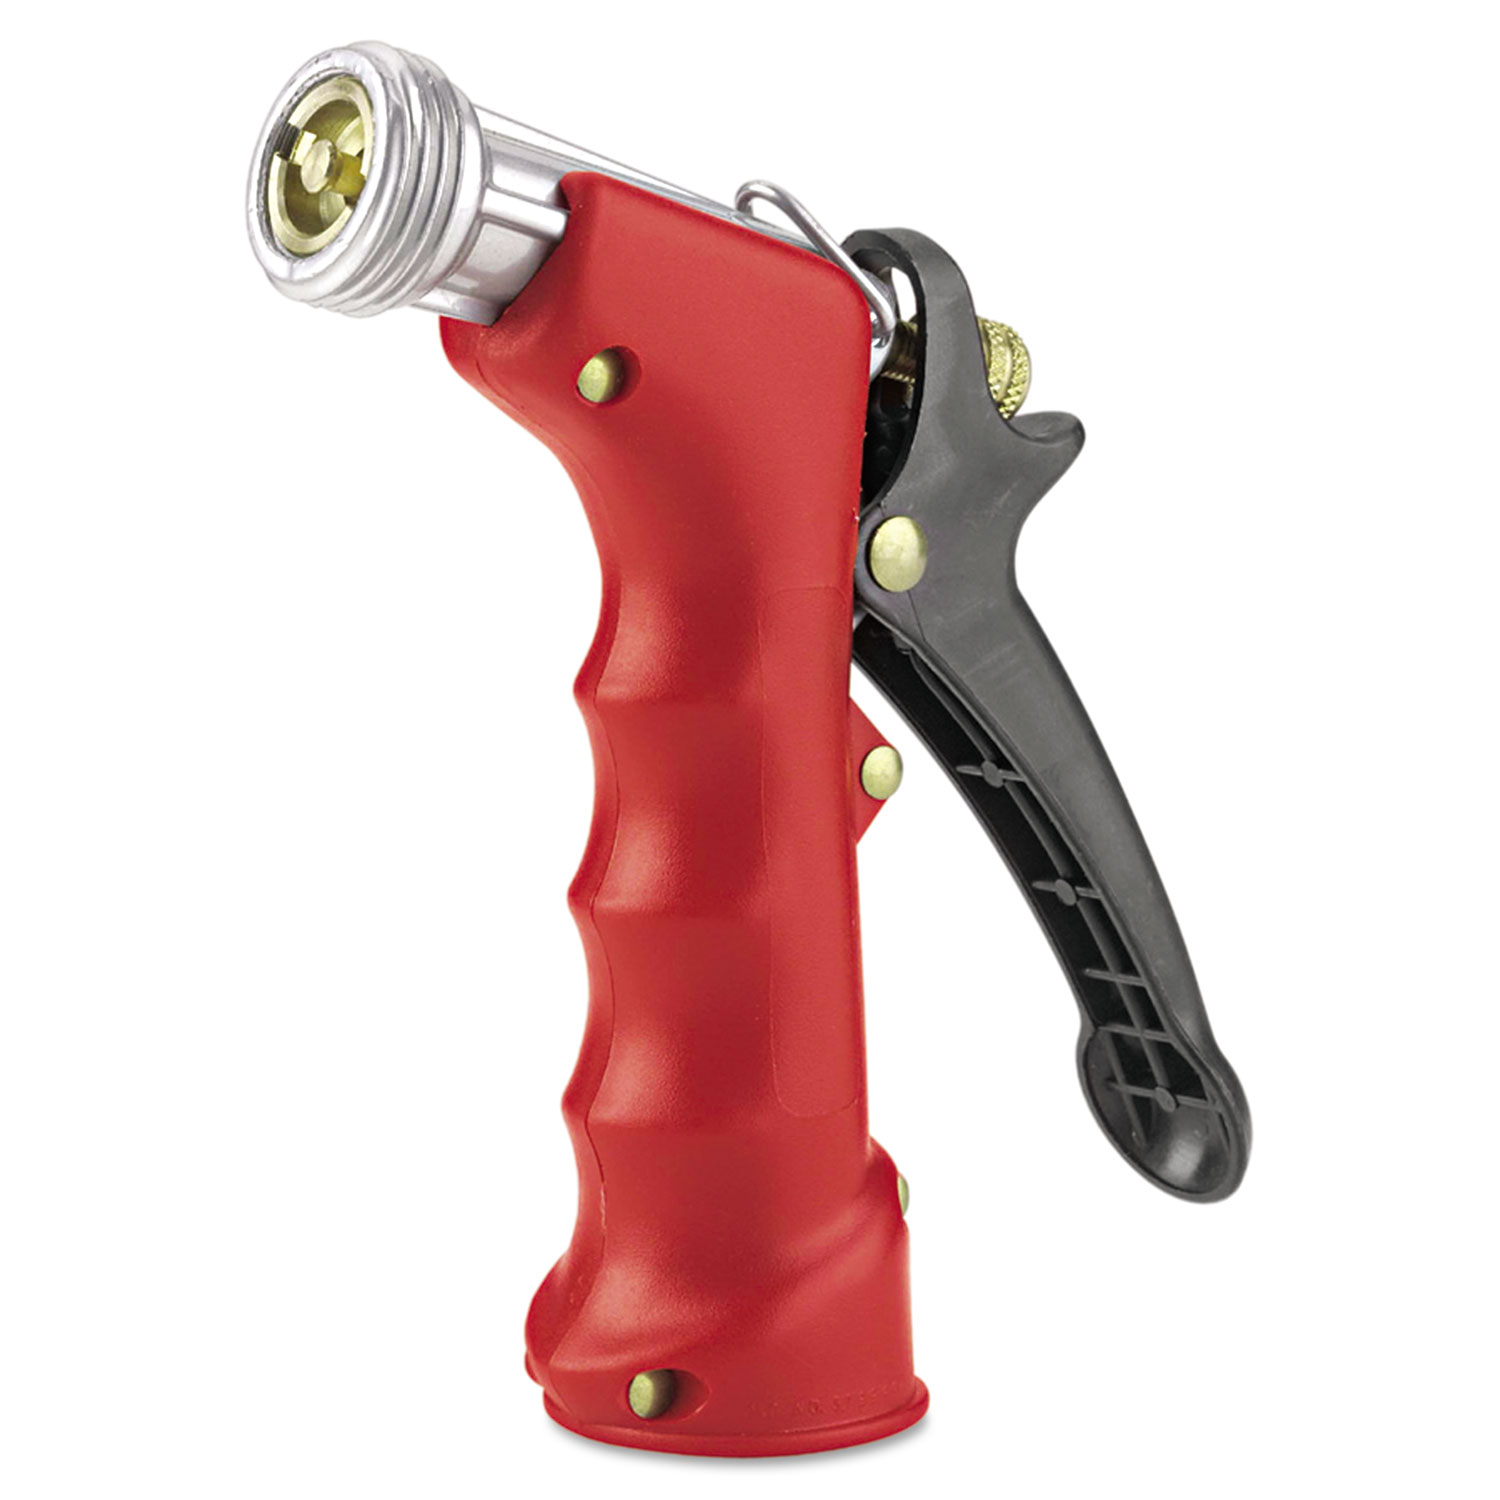  Gilmour 805722-1001 Insulated Grip Nozzle, Pistol-Grip, Zinc/Brass/Rubber, Red (GLM572TFR) 